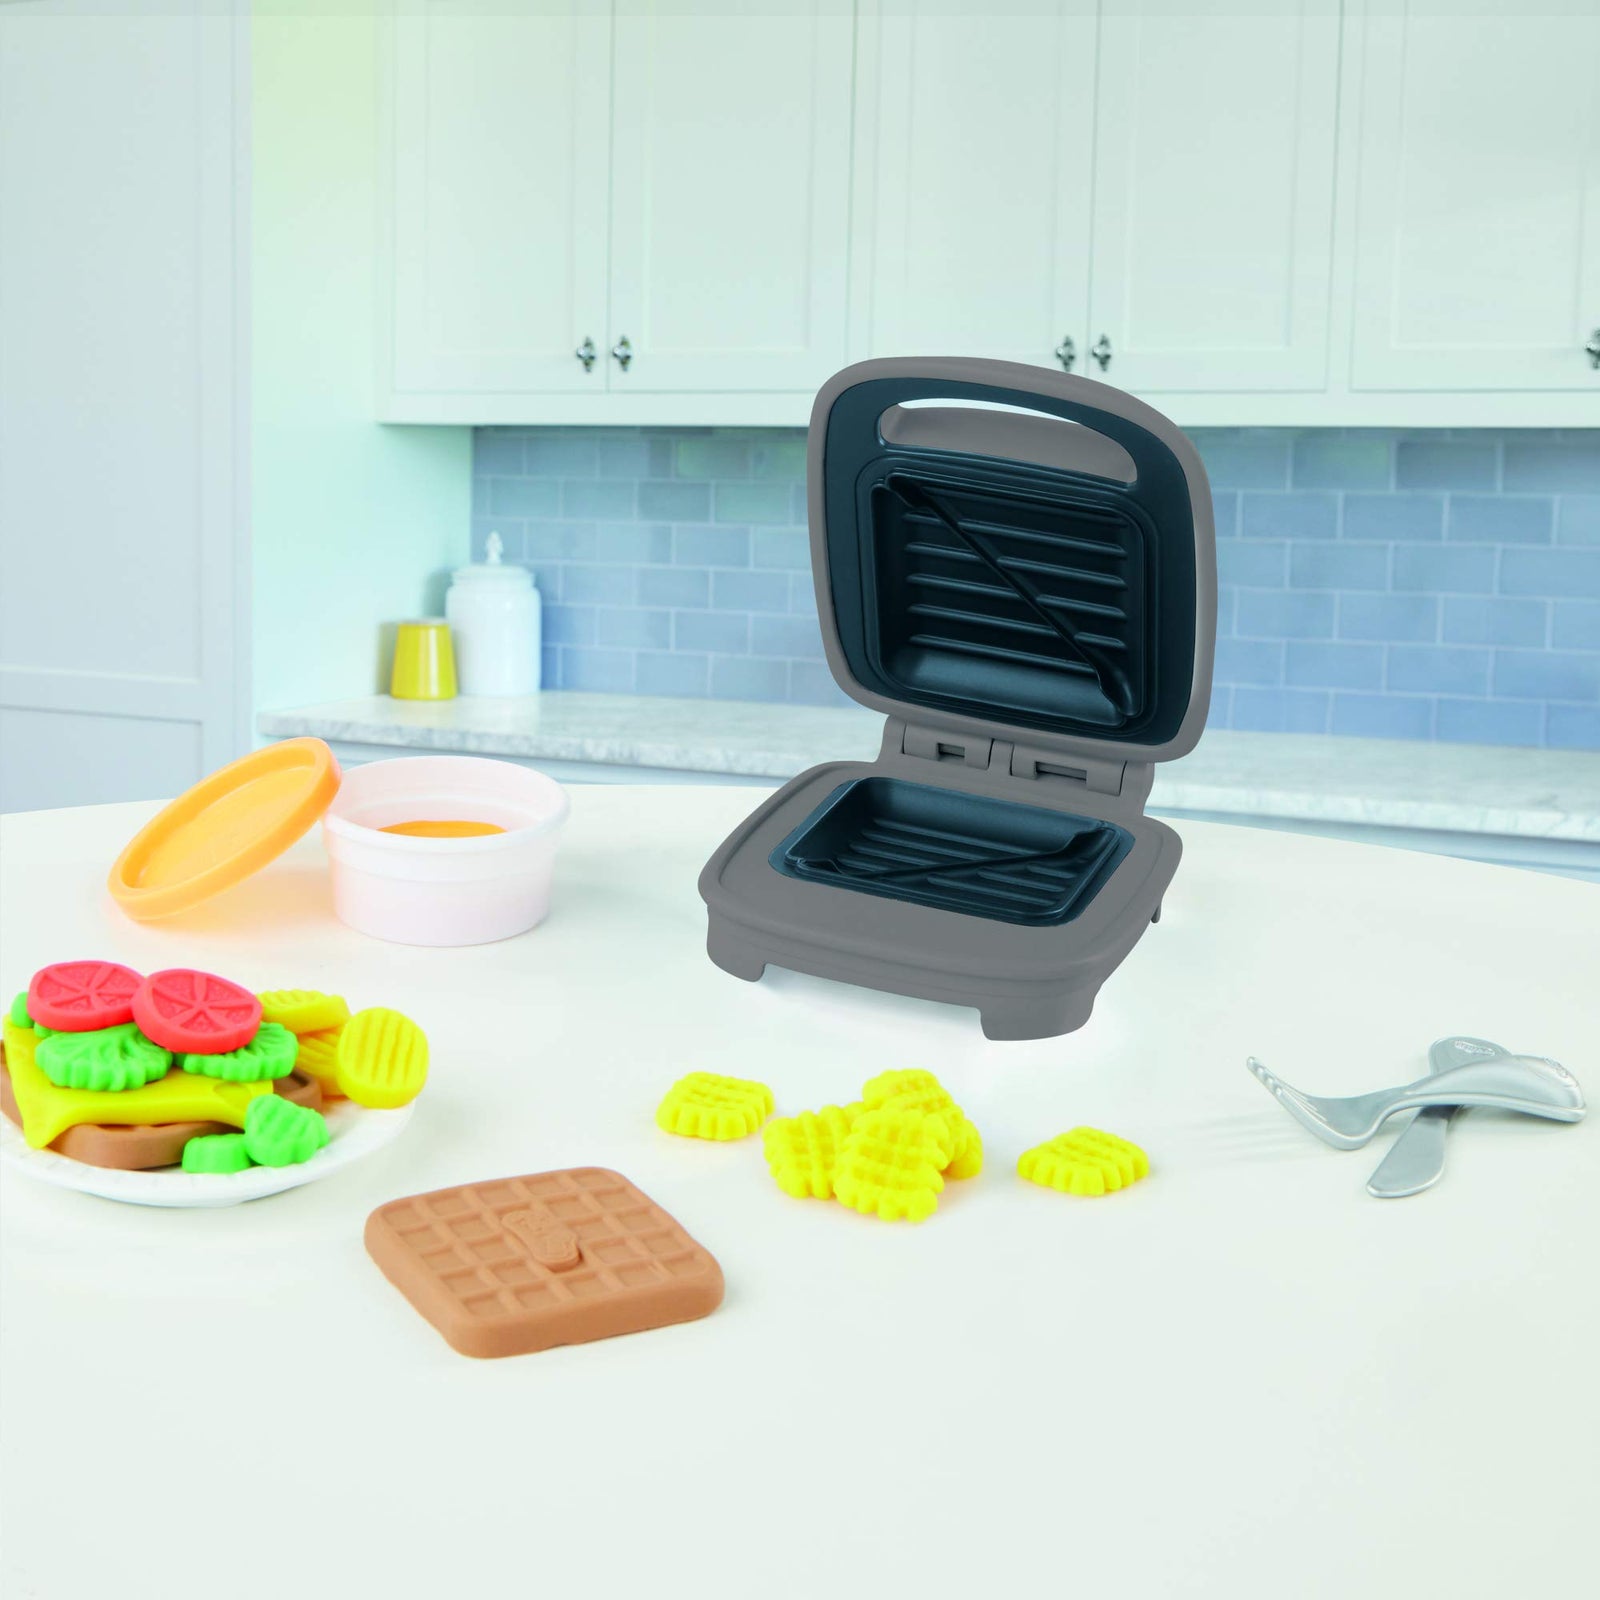 Play-Doh Kitchen Creations Cheesy Sandwich Play Food Set for Kids 3 Years and Up Elastix Compound and 6 Additional Colors